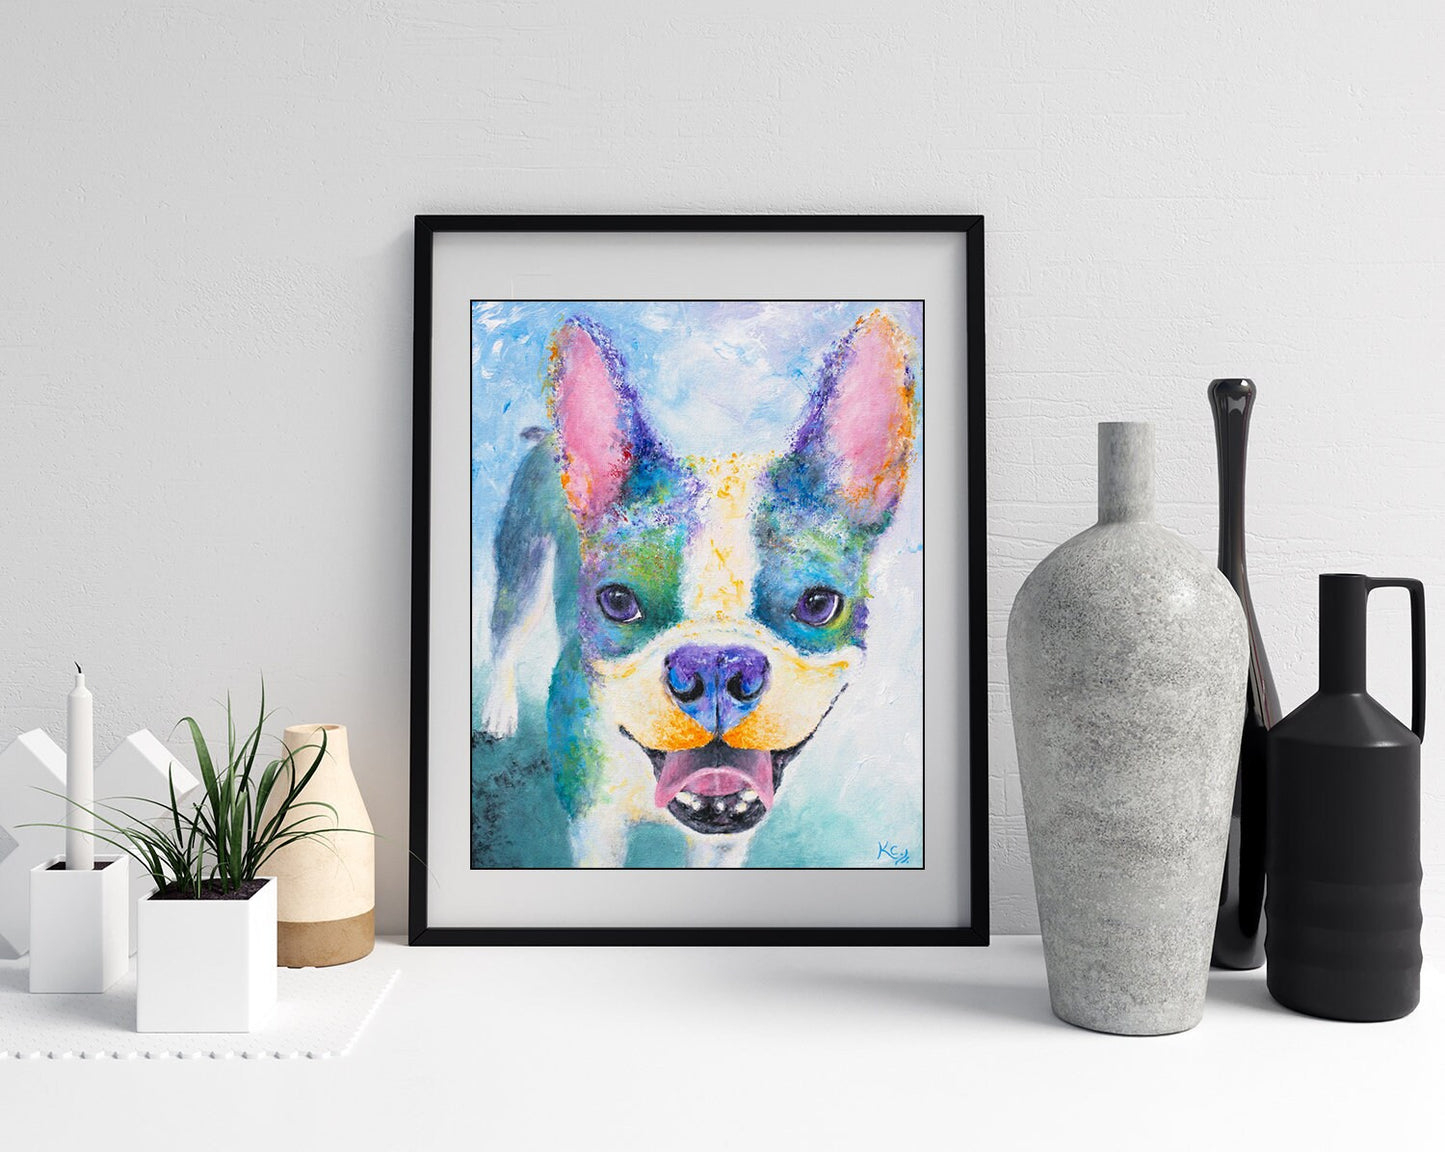 Boston Terrier Art - Boston Terrier Print. Boston Terrier Painting. Print on PAPER or CANVAS by Krystle Cole